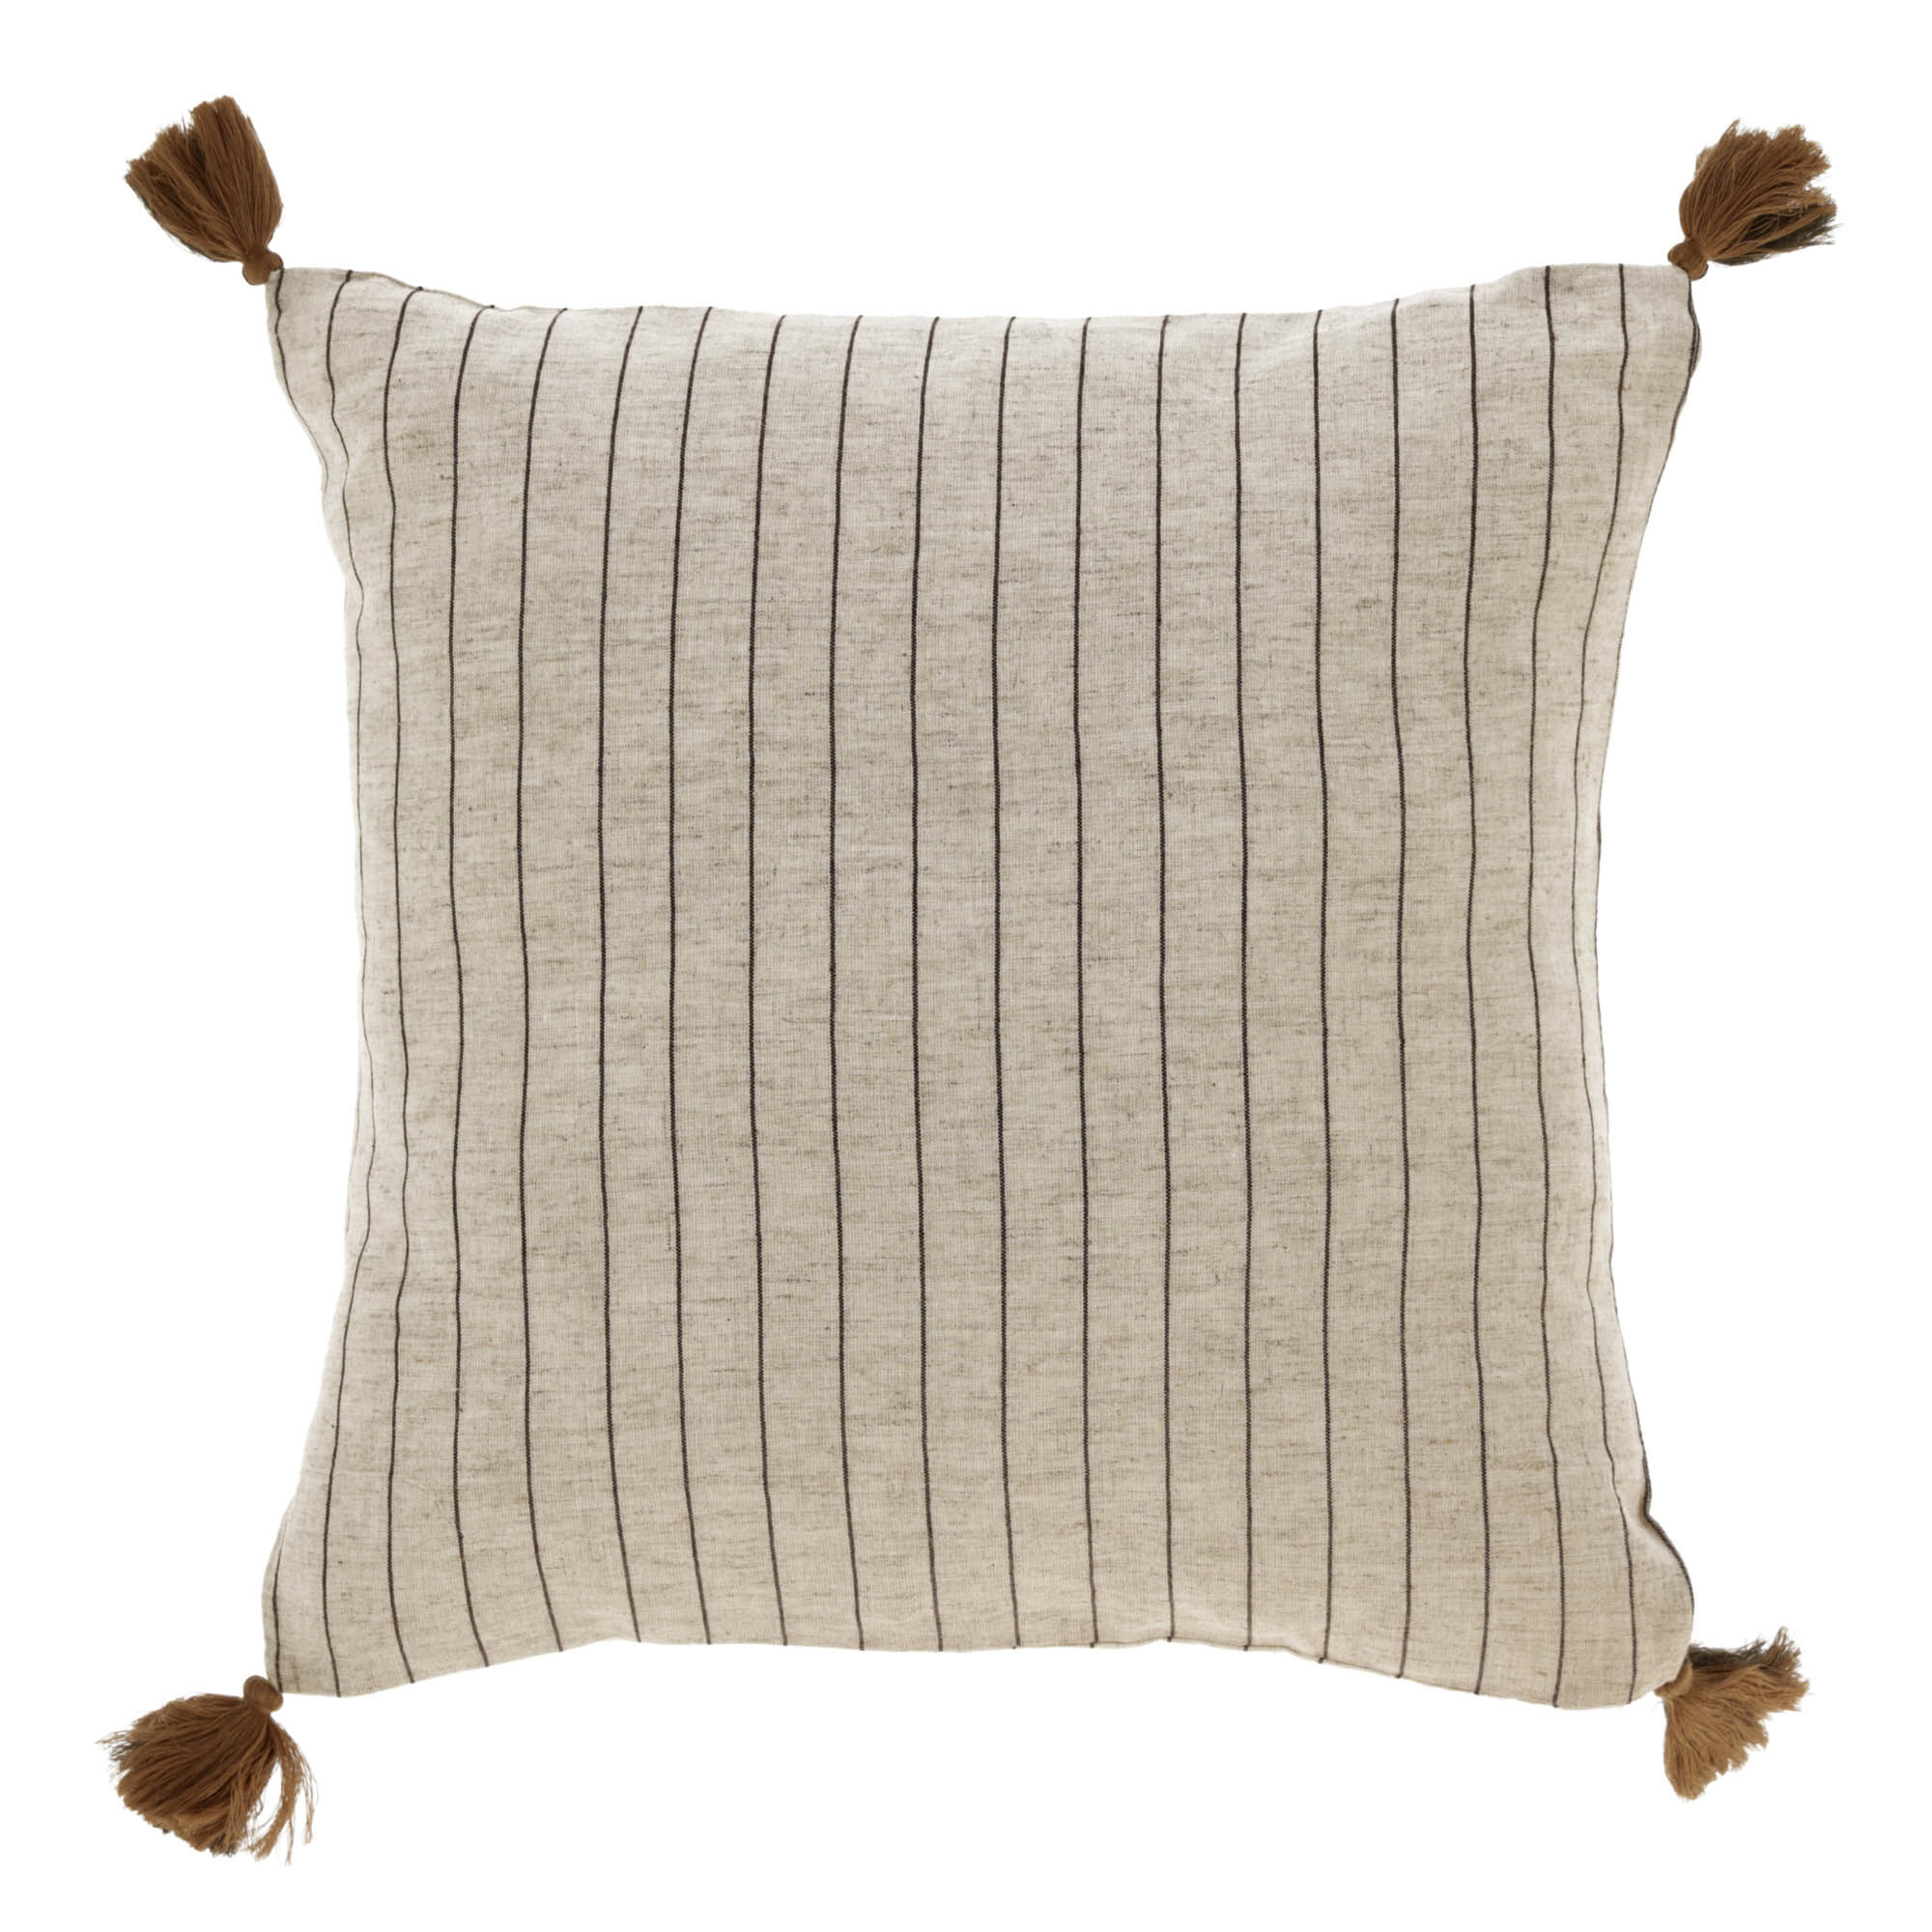 Kave Home Sagira 100% cotton cushion cover beige with brown tassels and stripes 45 x 45 cm